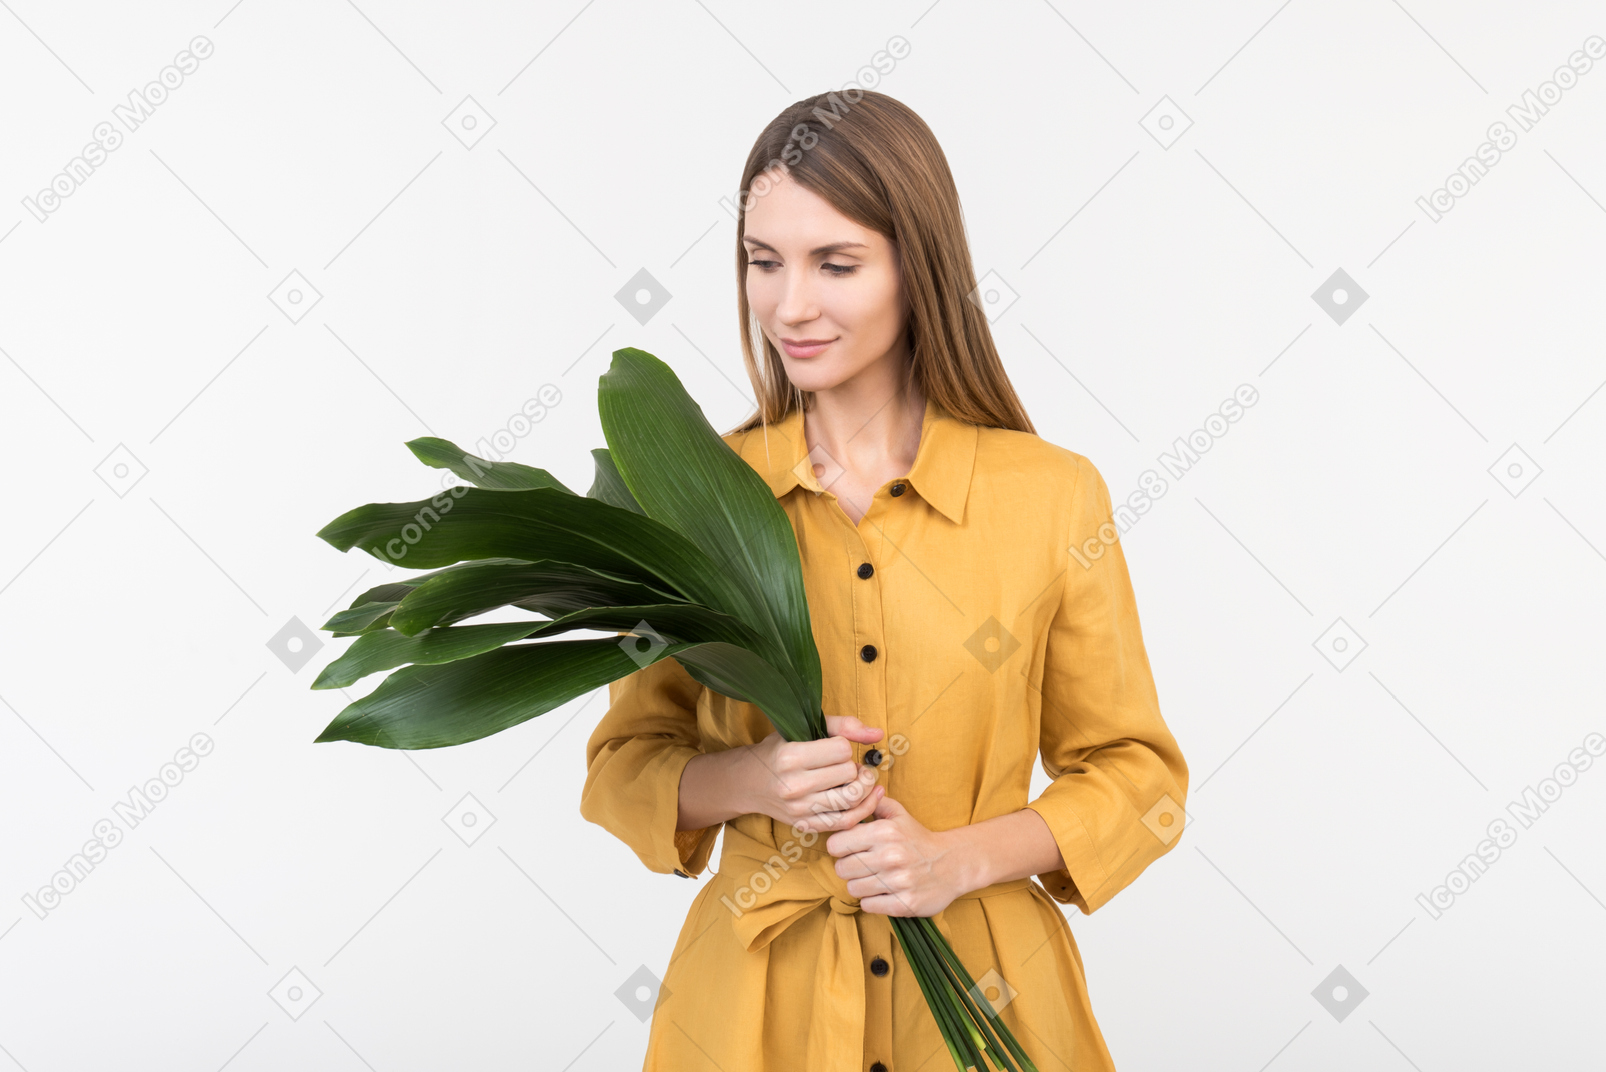 Young woman holding green leaves